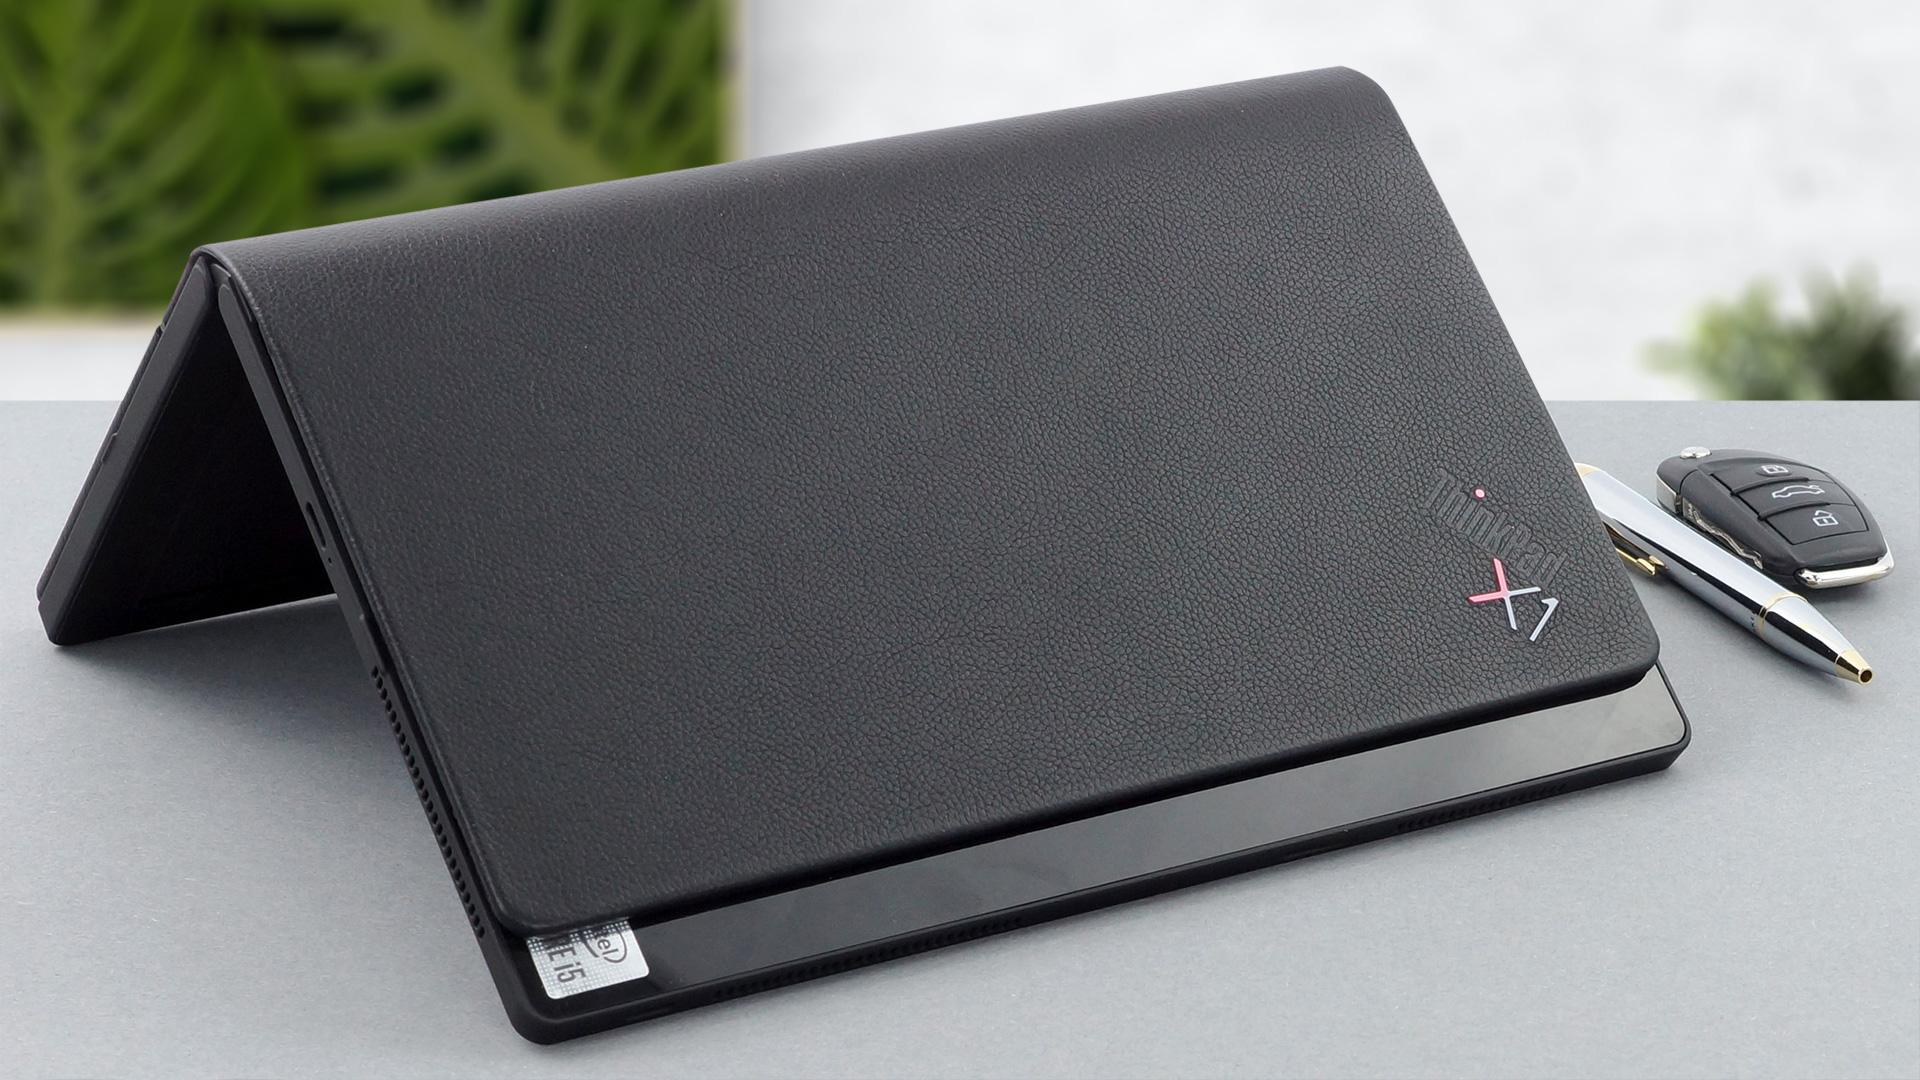 Top 5 reasons to BUY or NOT to buy the Lenovo ThinkPad X1 Fold ...